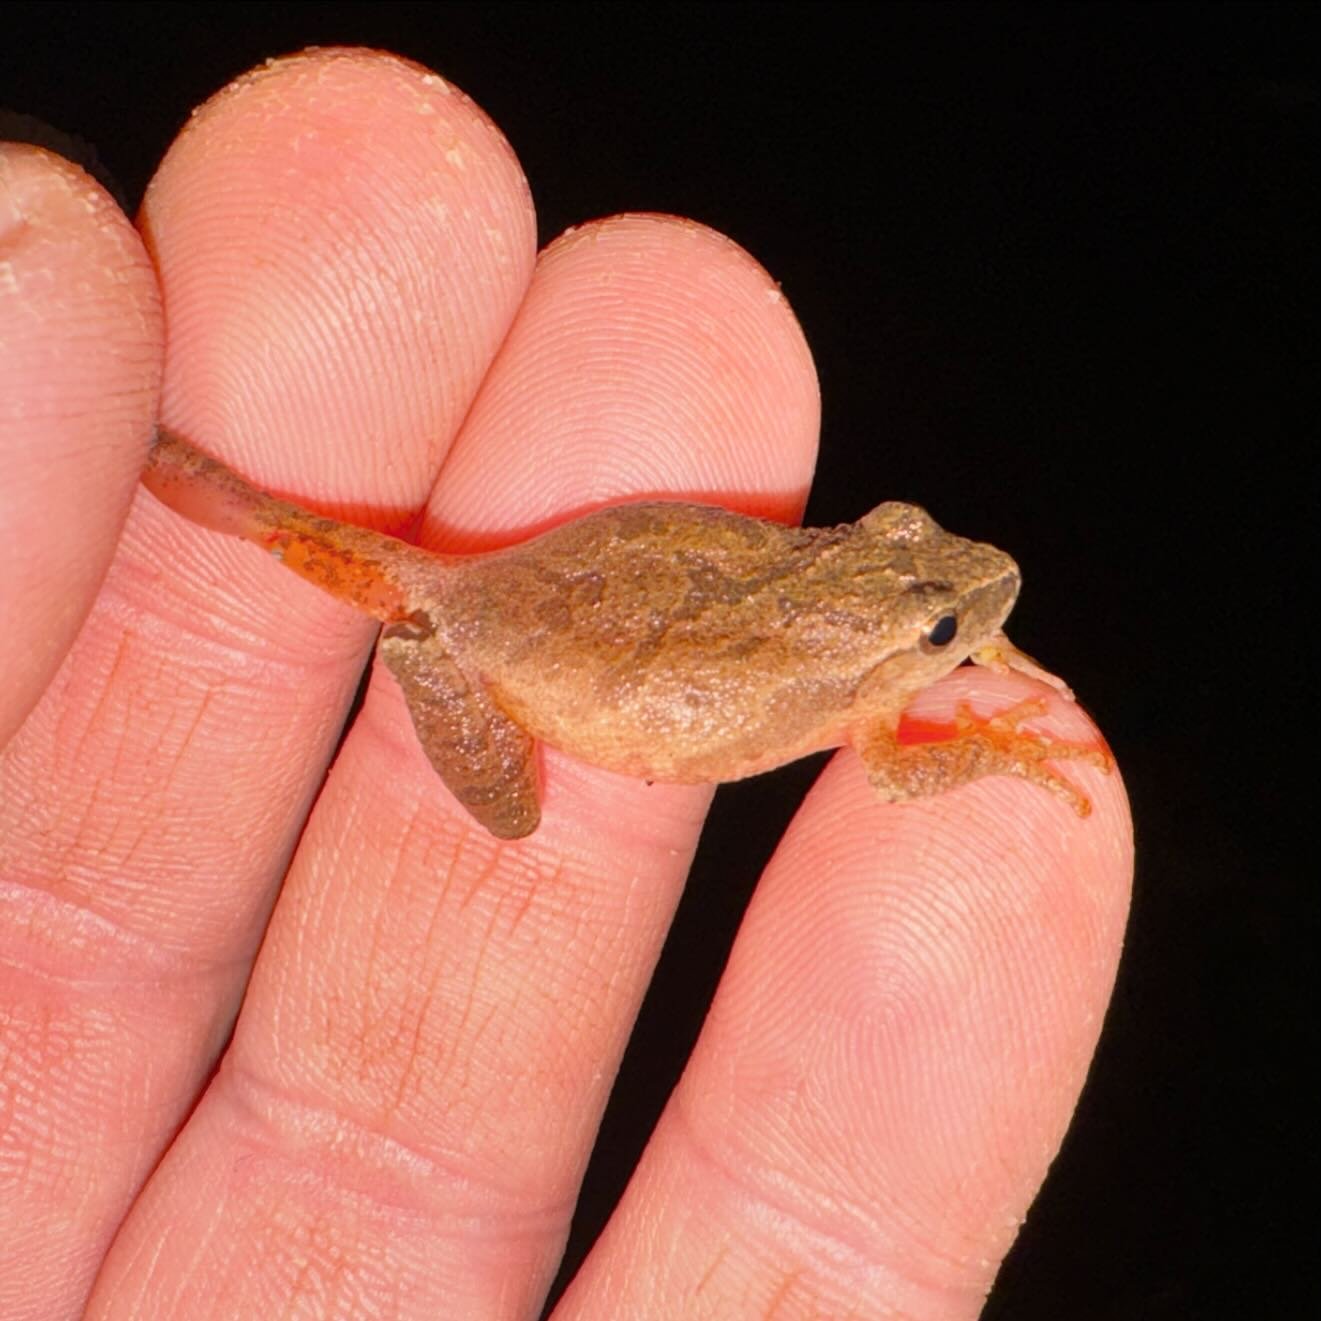 Spring has officially sprung. #SpringPeeper #Frogs #herpmapper